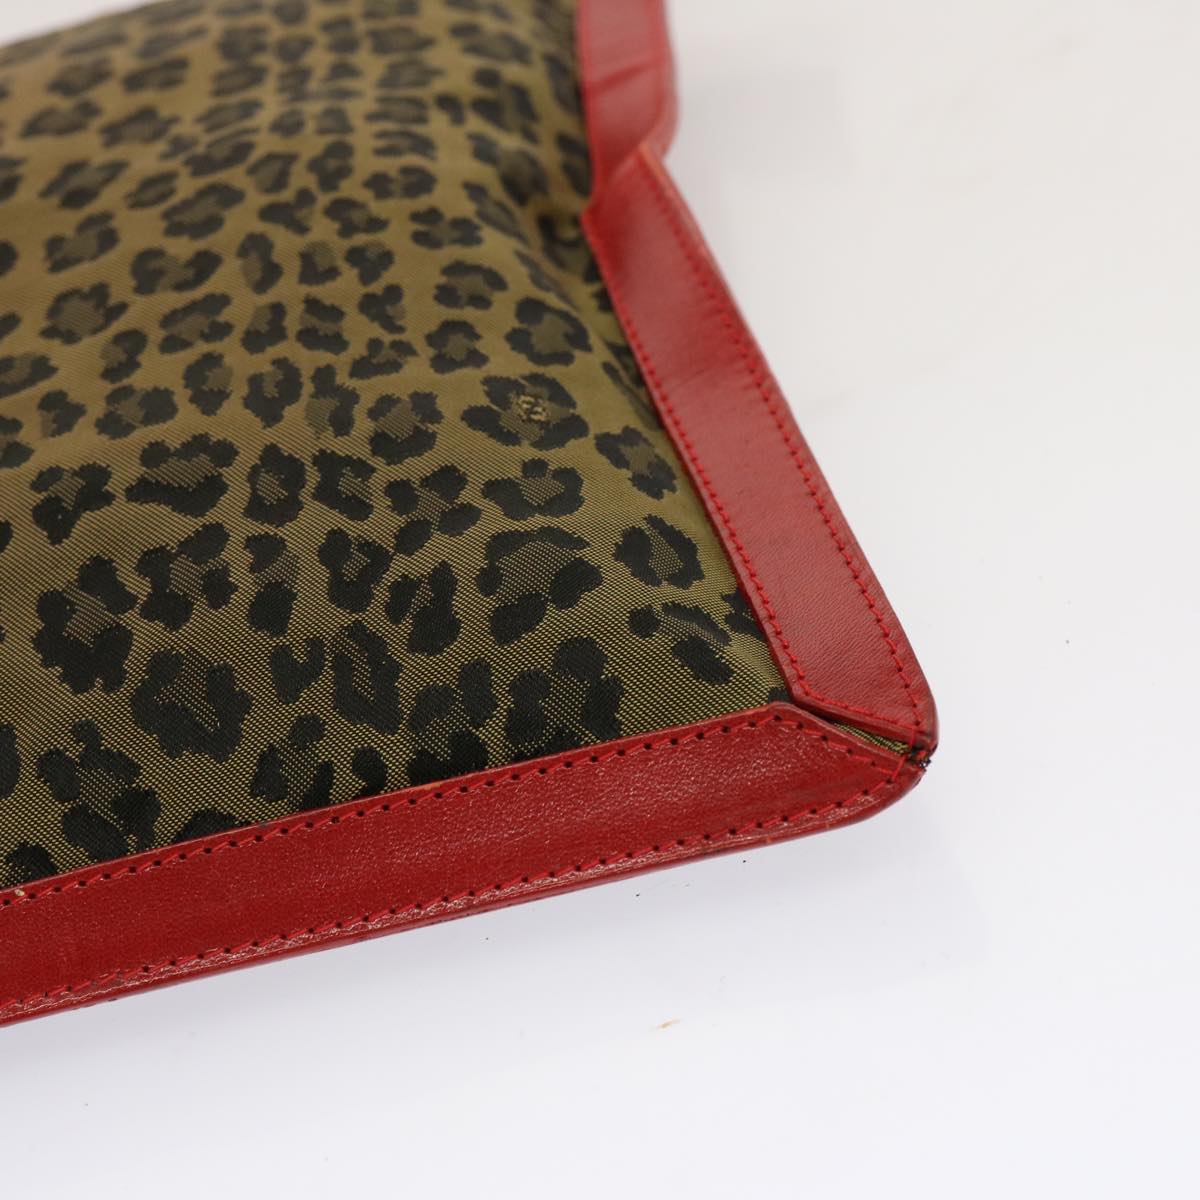 FENDI Leopard Clutch Bag Nylon Leather Red Brown Auth bs13085